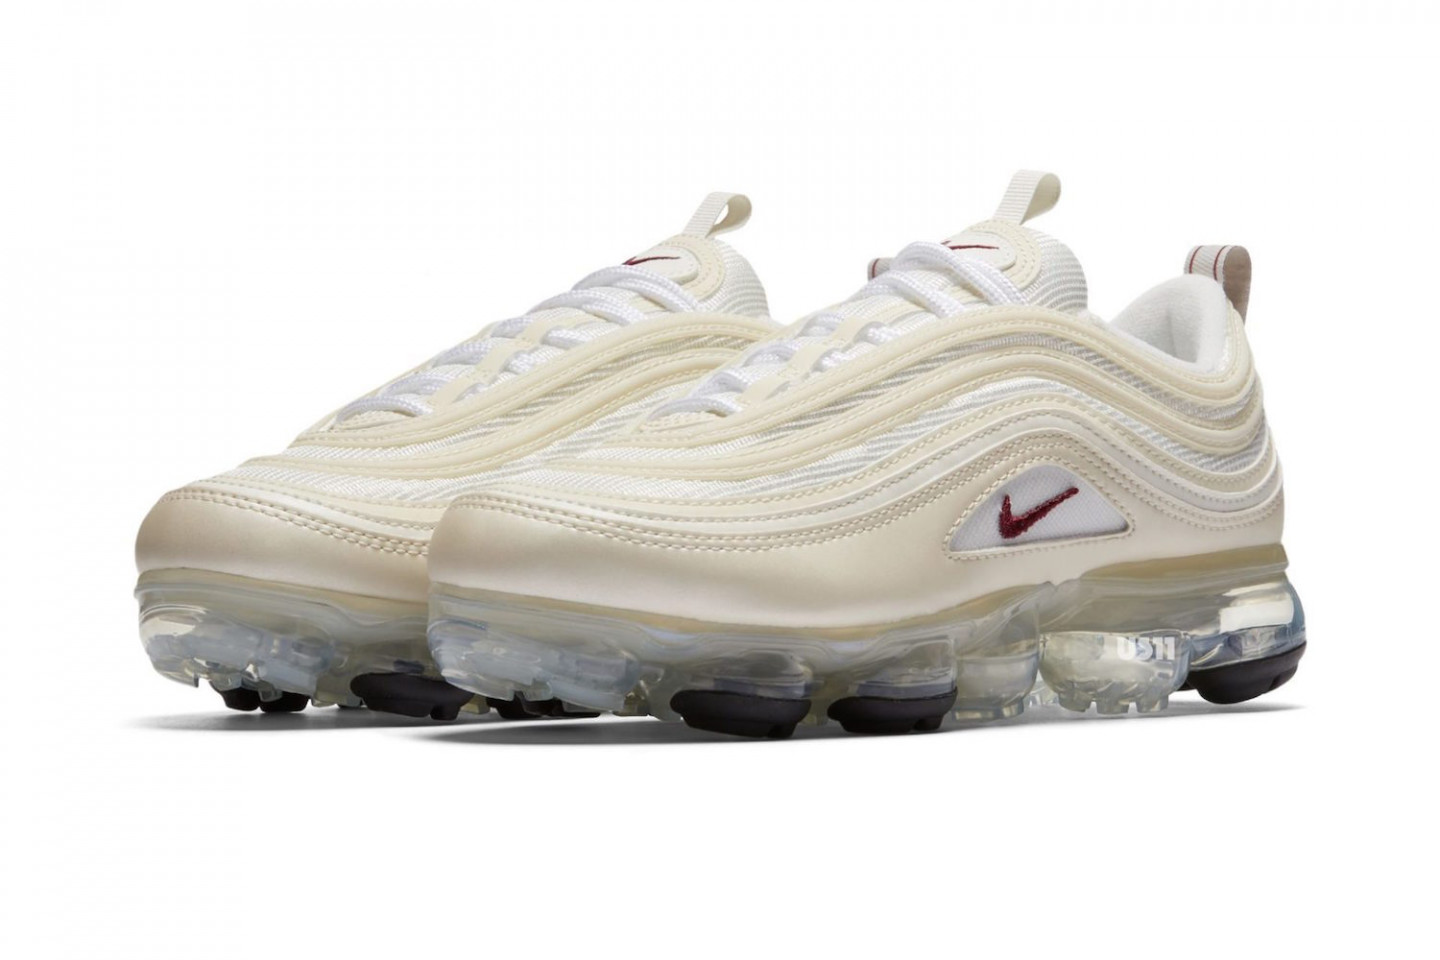 Nike Have Fused the Air Max 97 and Air Vapormax